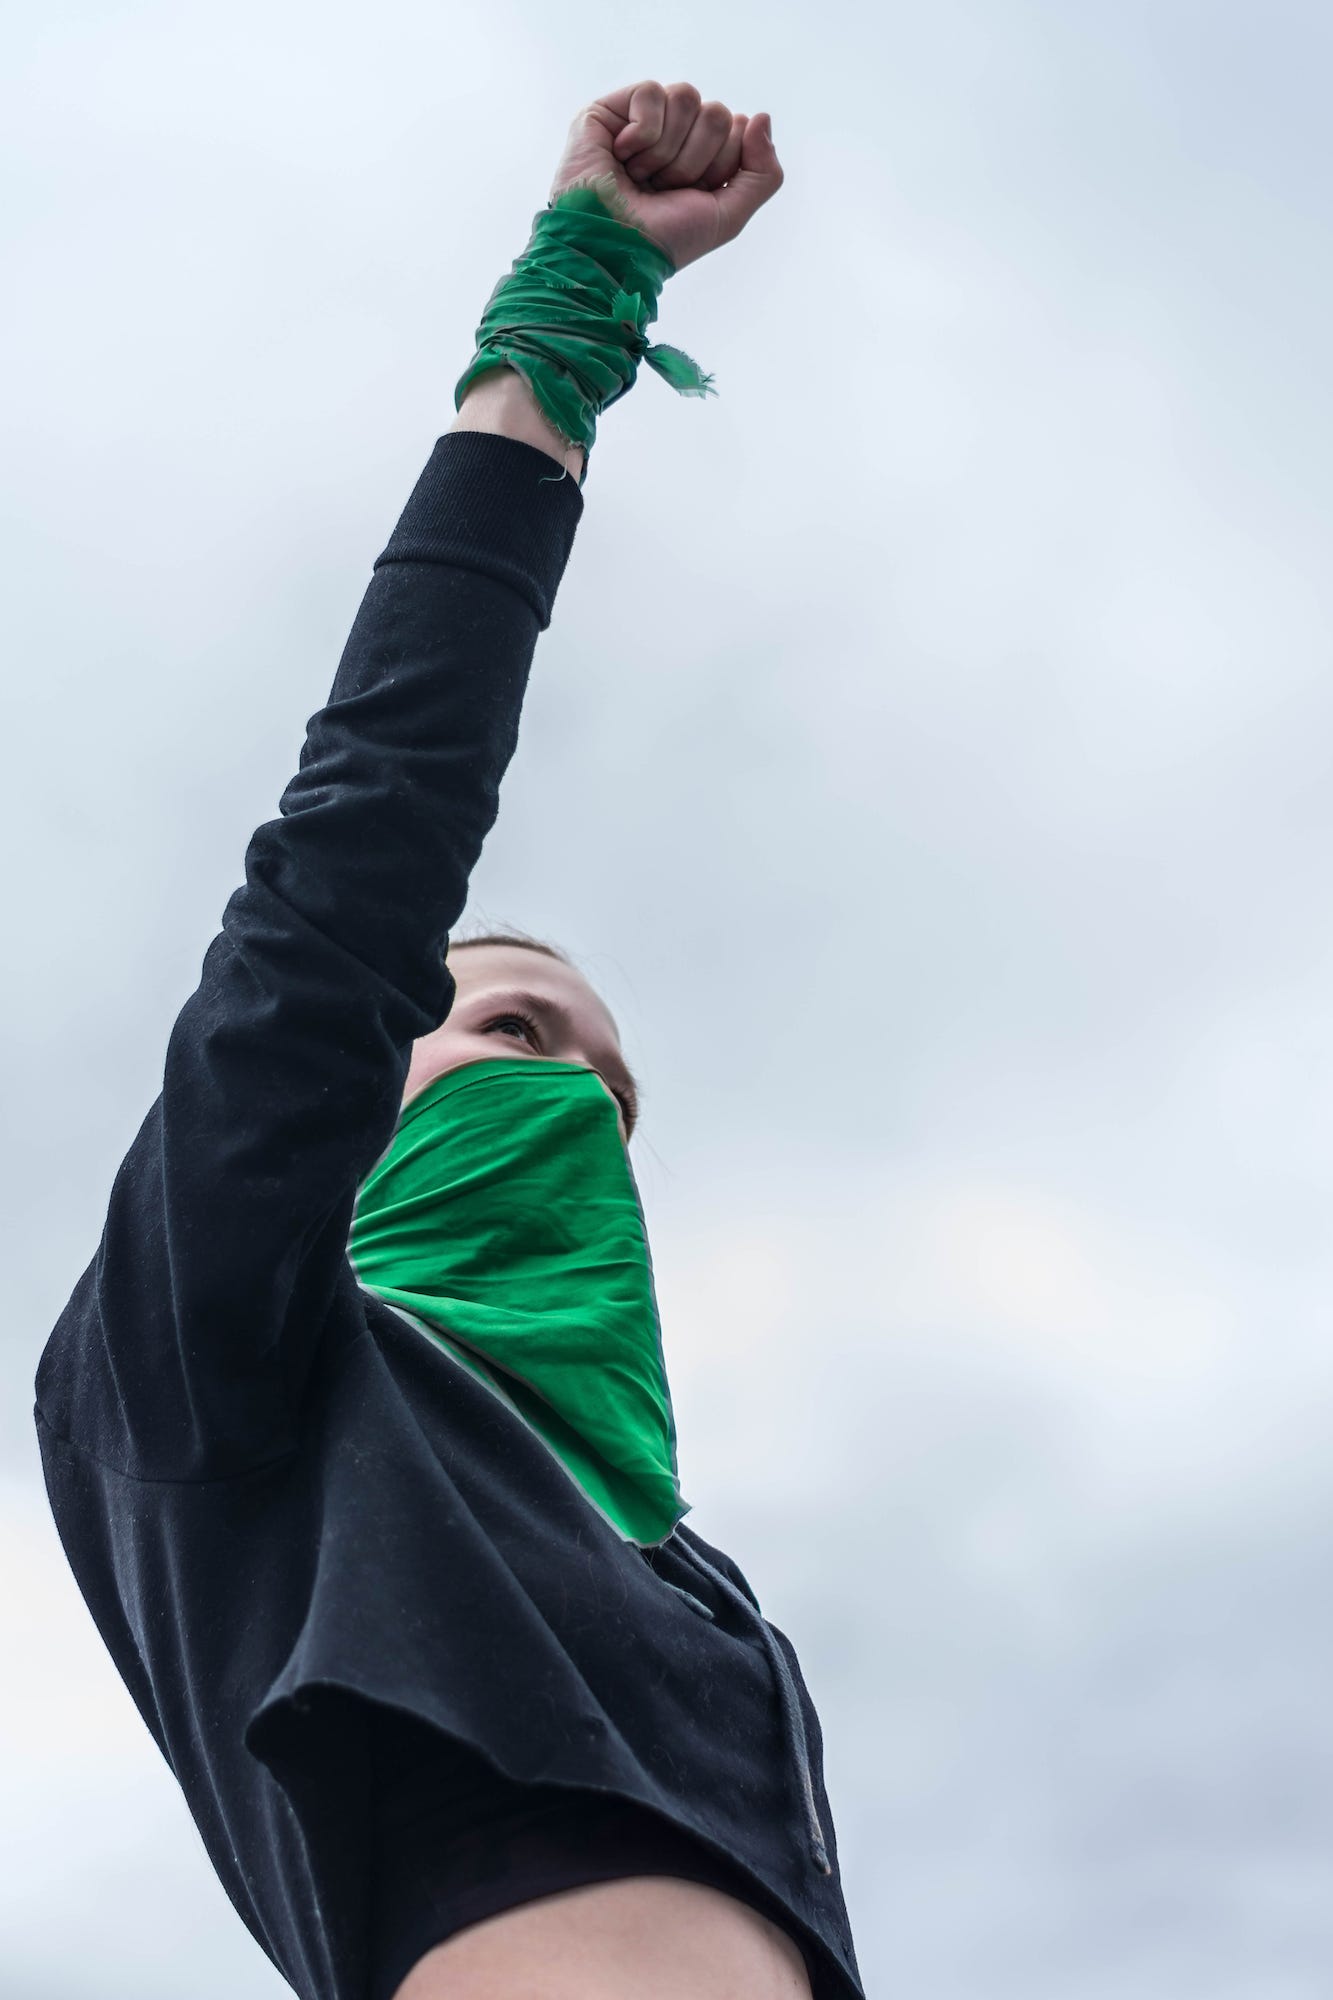 Woman wearing green bandana across face standing with fist raised